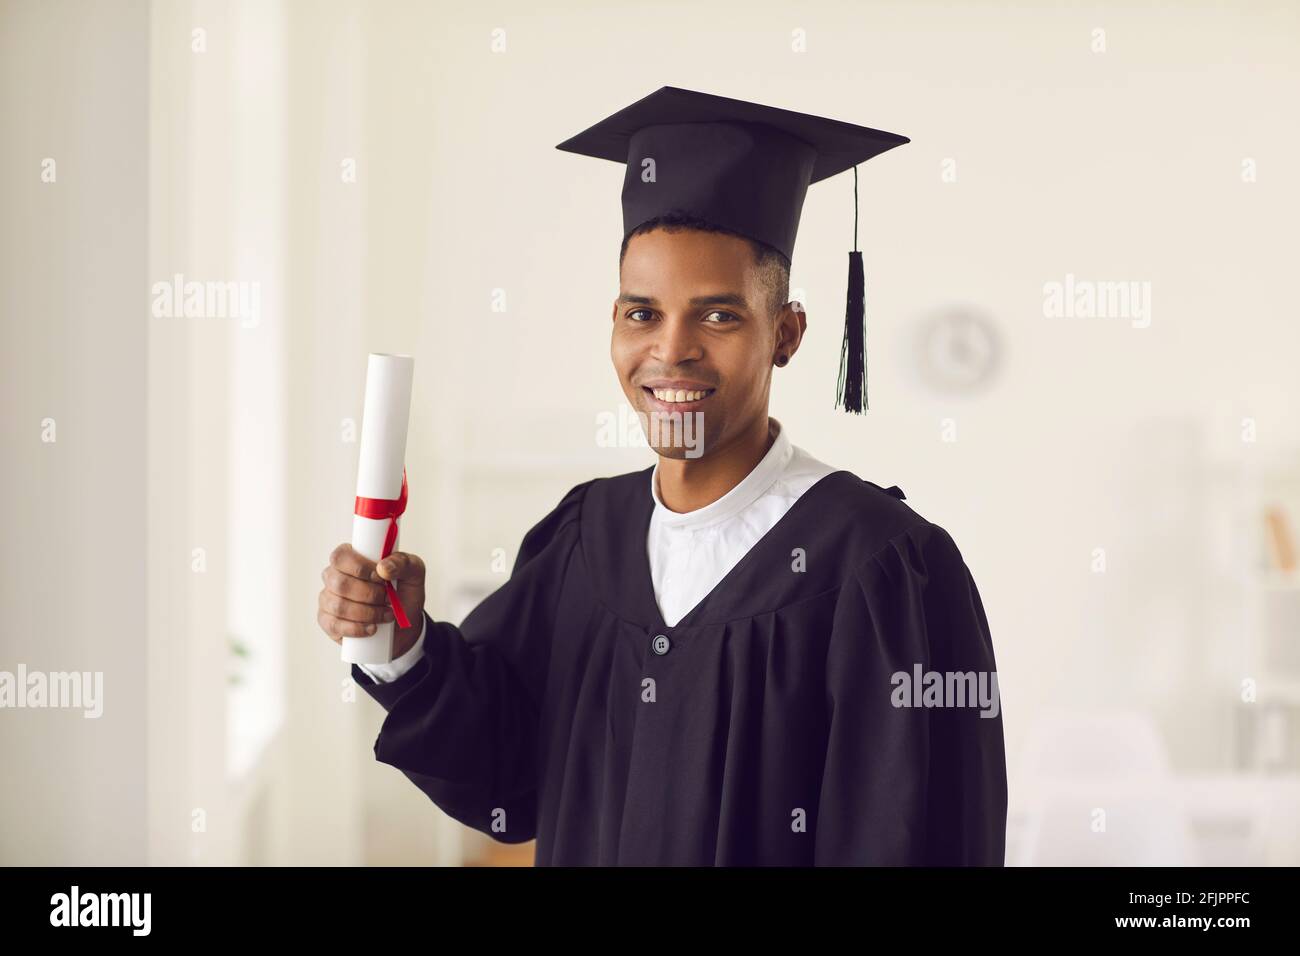 African-American student in black academic gown and cap holding diploma and smiling Stock Photo